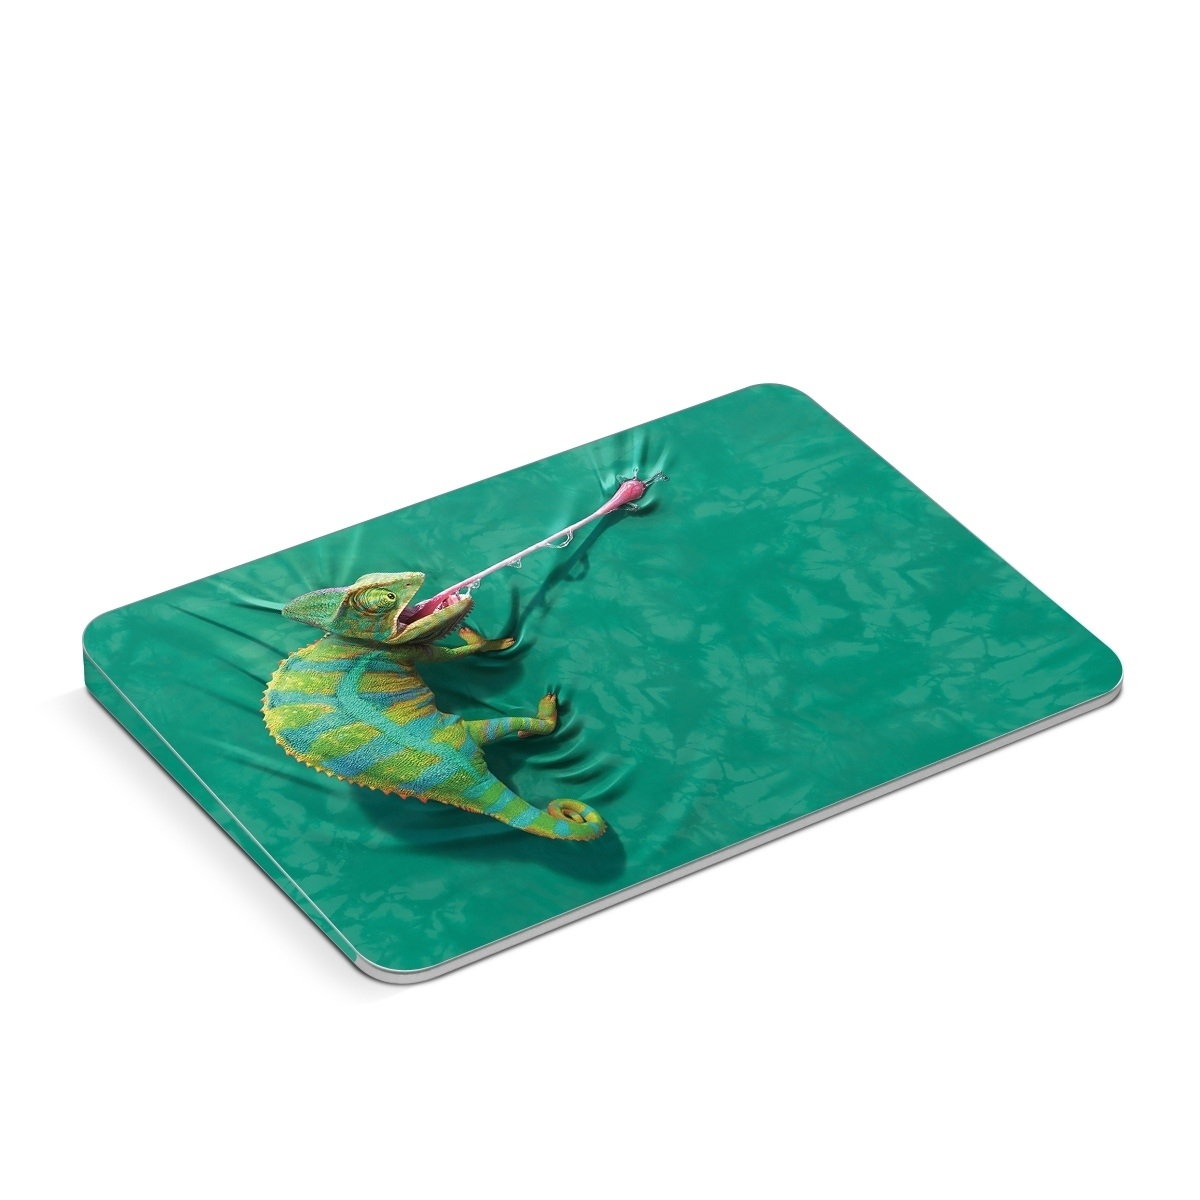 Apple Magic Trackpad Skin design of Green, Fish, Tail, Chameleon, with blue, black, green, gray colors